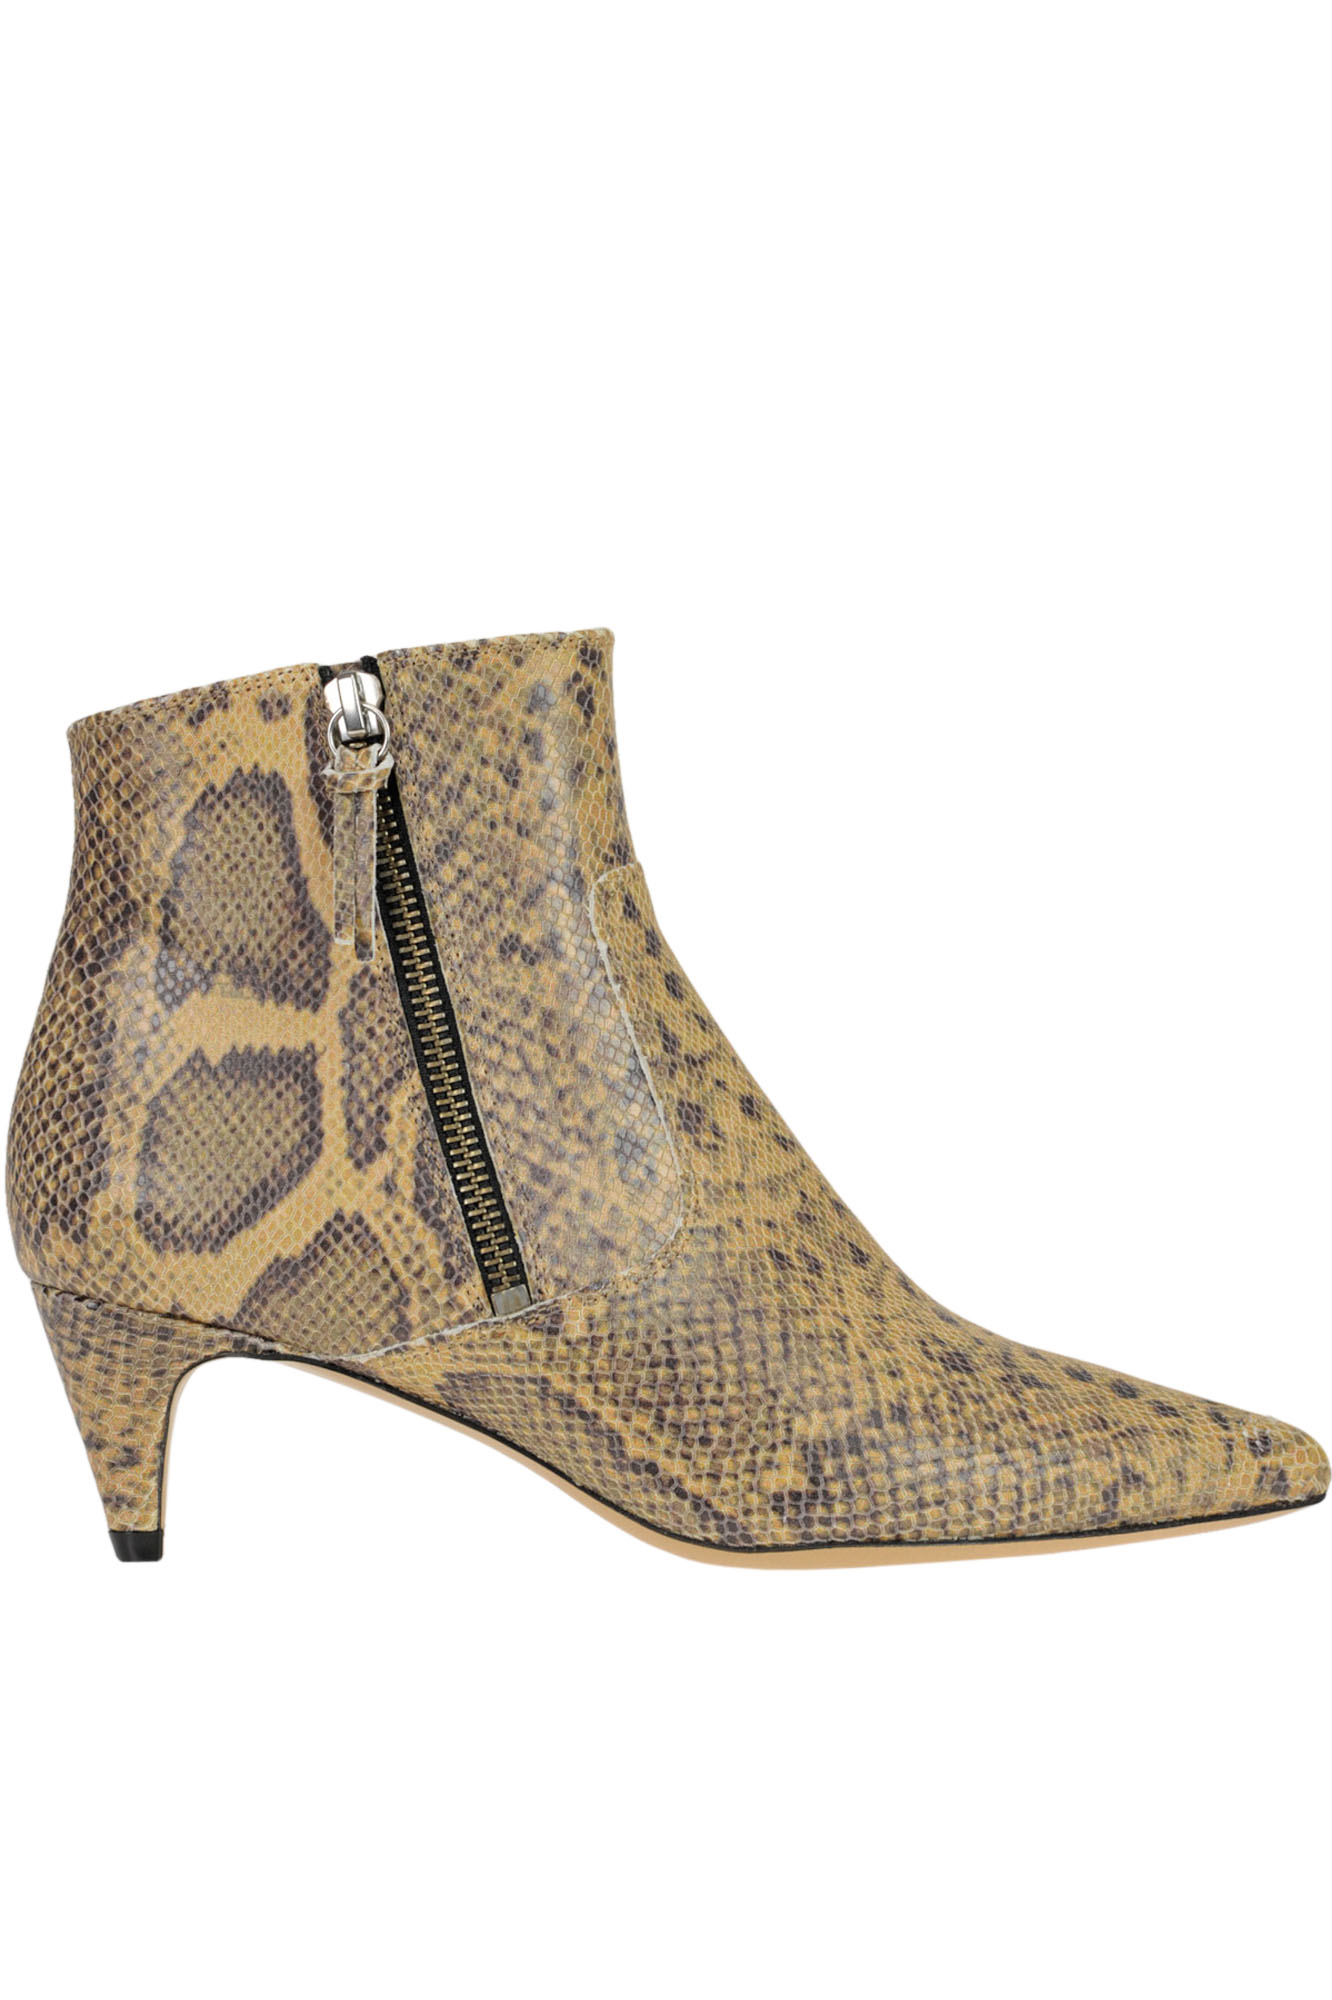 Isabel Marant Reptile Print Leather Ankle Boots In Beige